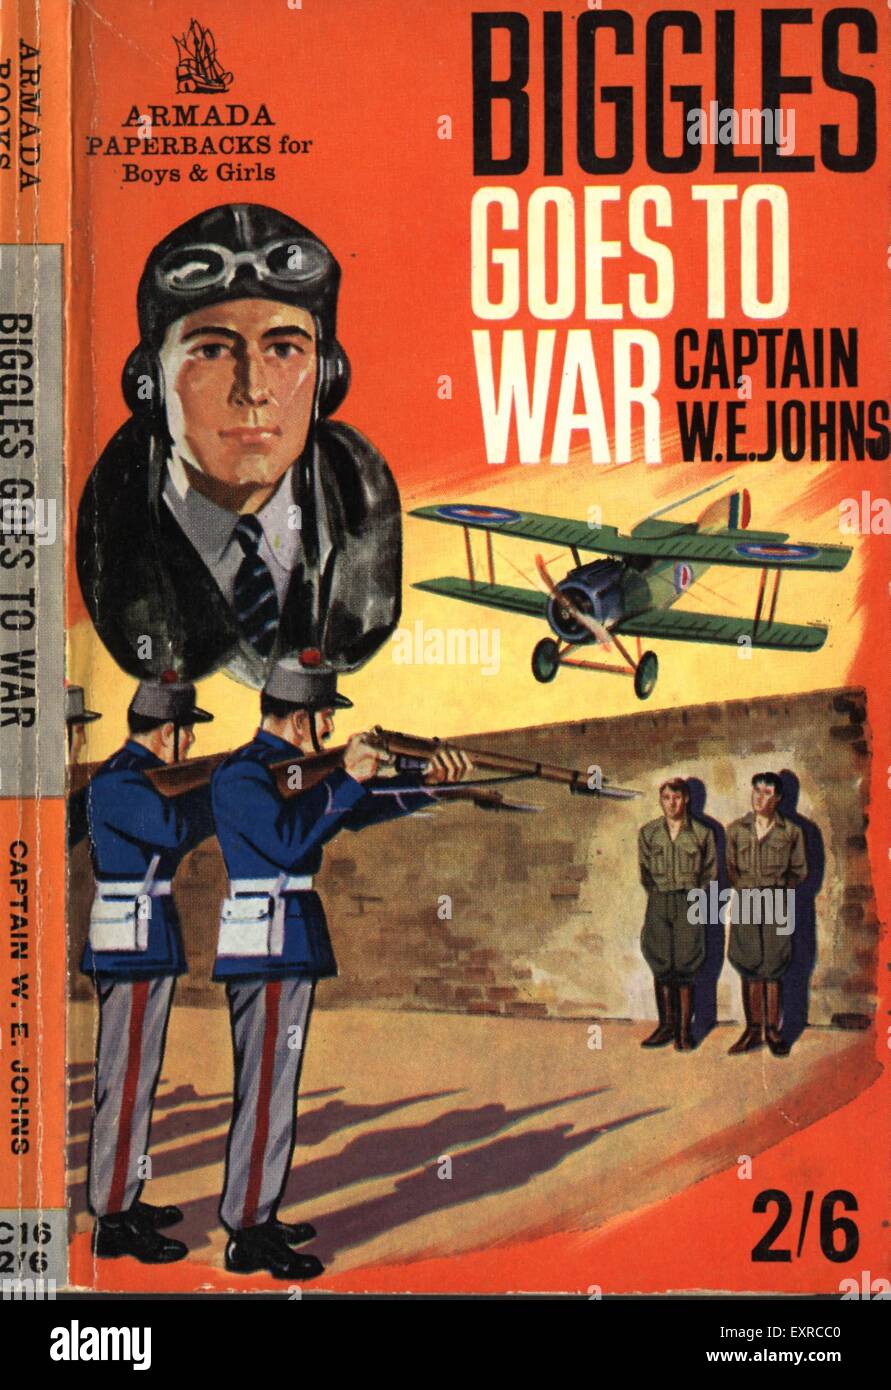 1960s UK Biggles Goes to War Book Cover Stock Photo